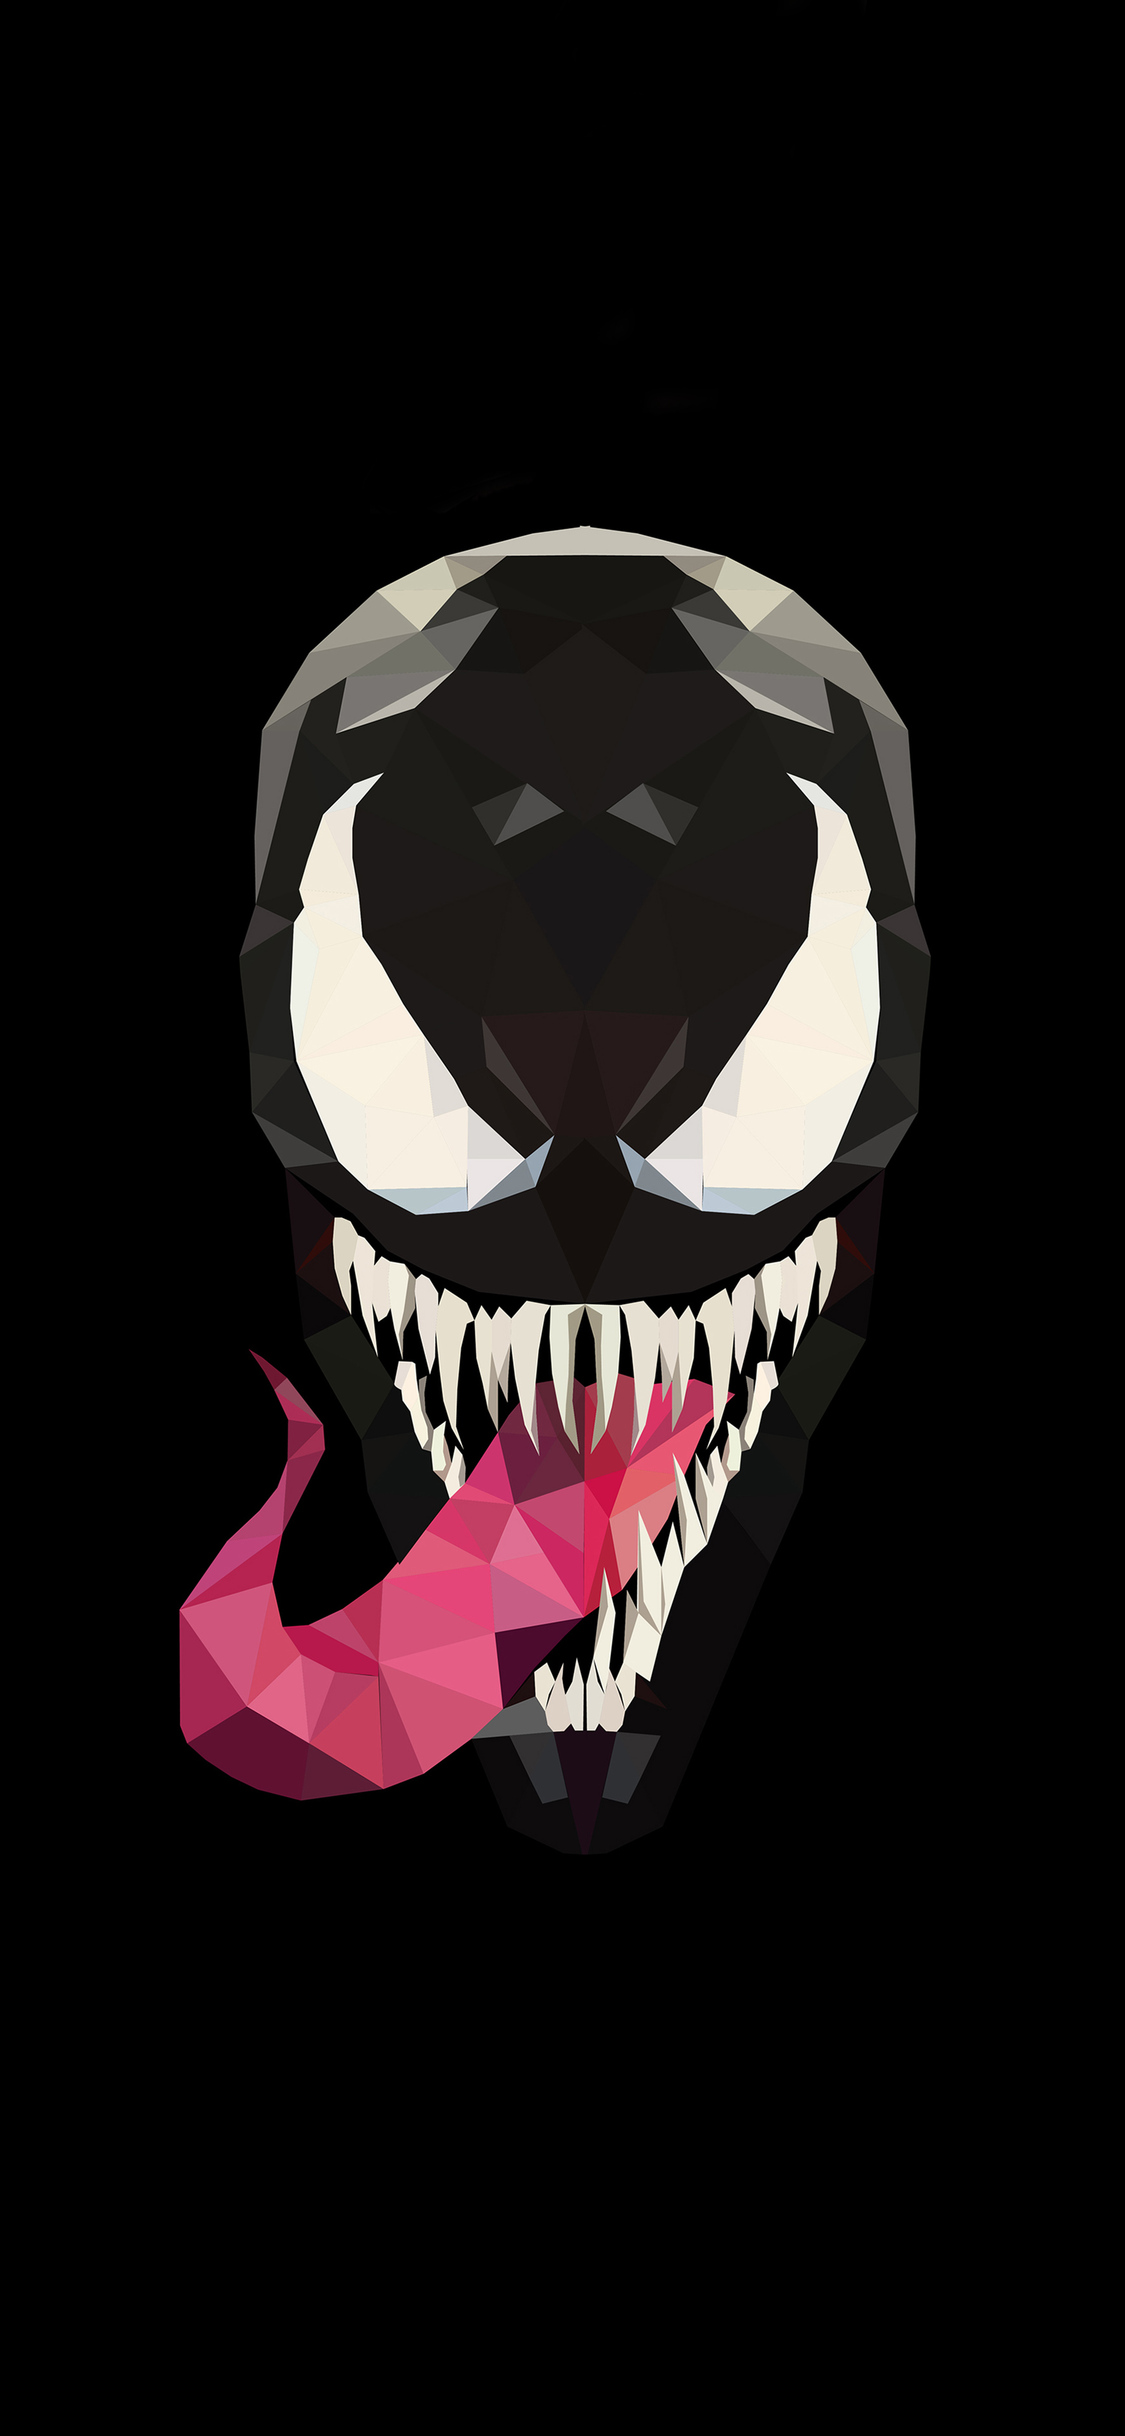 Cool Venom White Wallpapers - Aesthetic iPhone Marvel Wallpapers